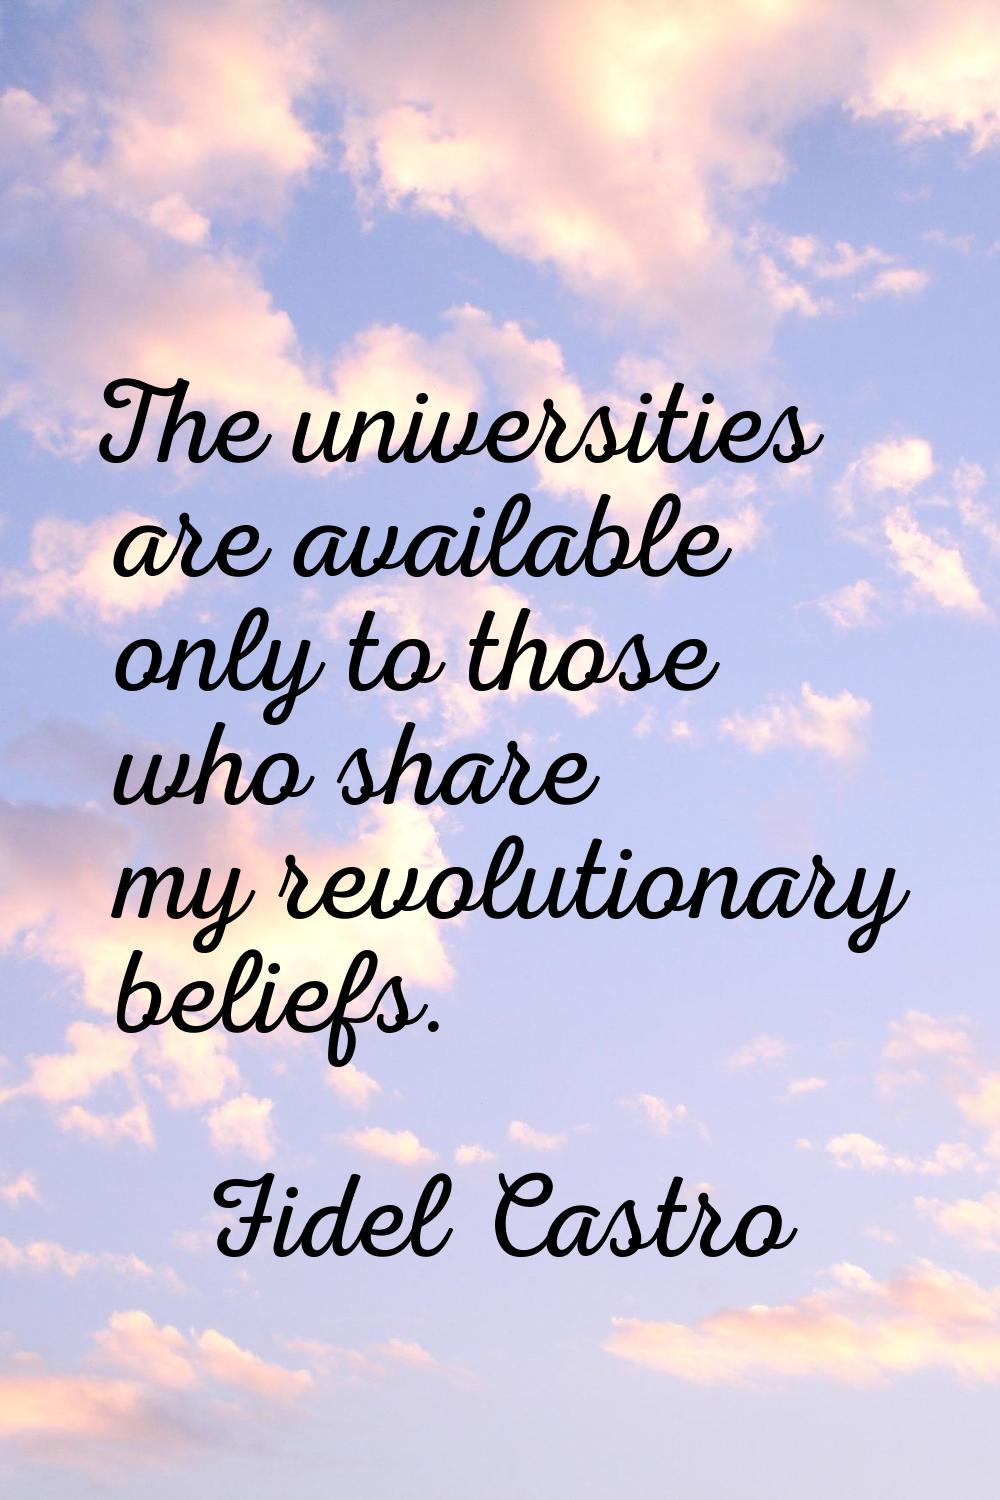 The universities are available only to those who share my revolutionary beliefs.